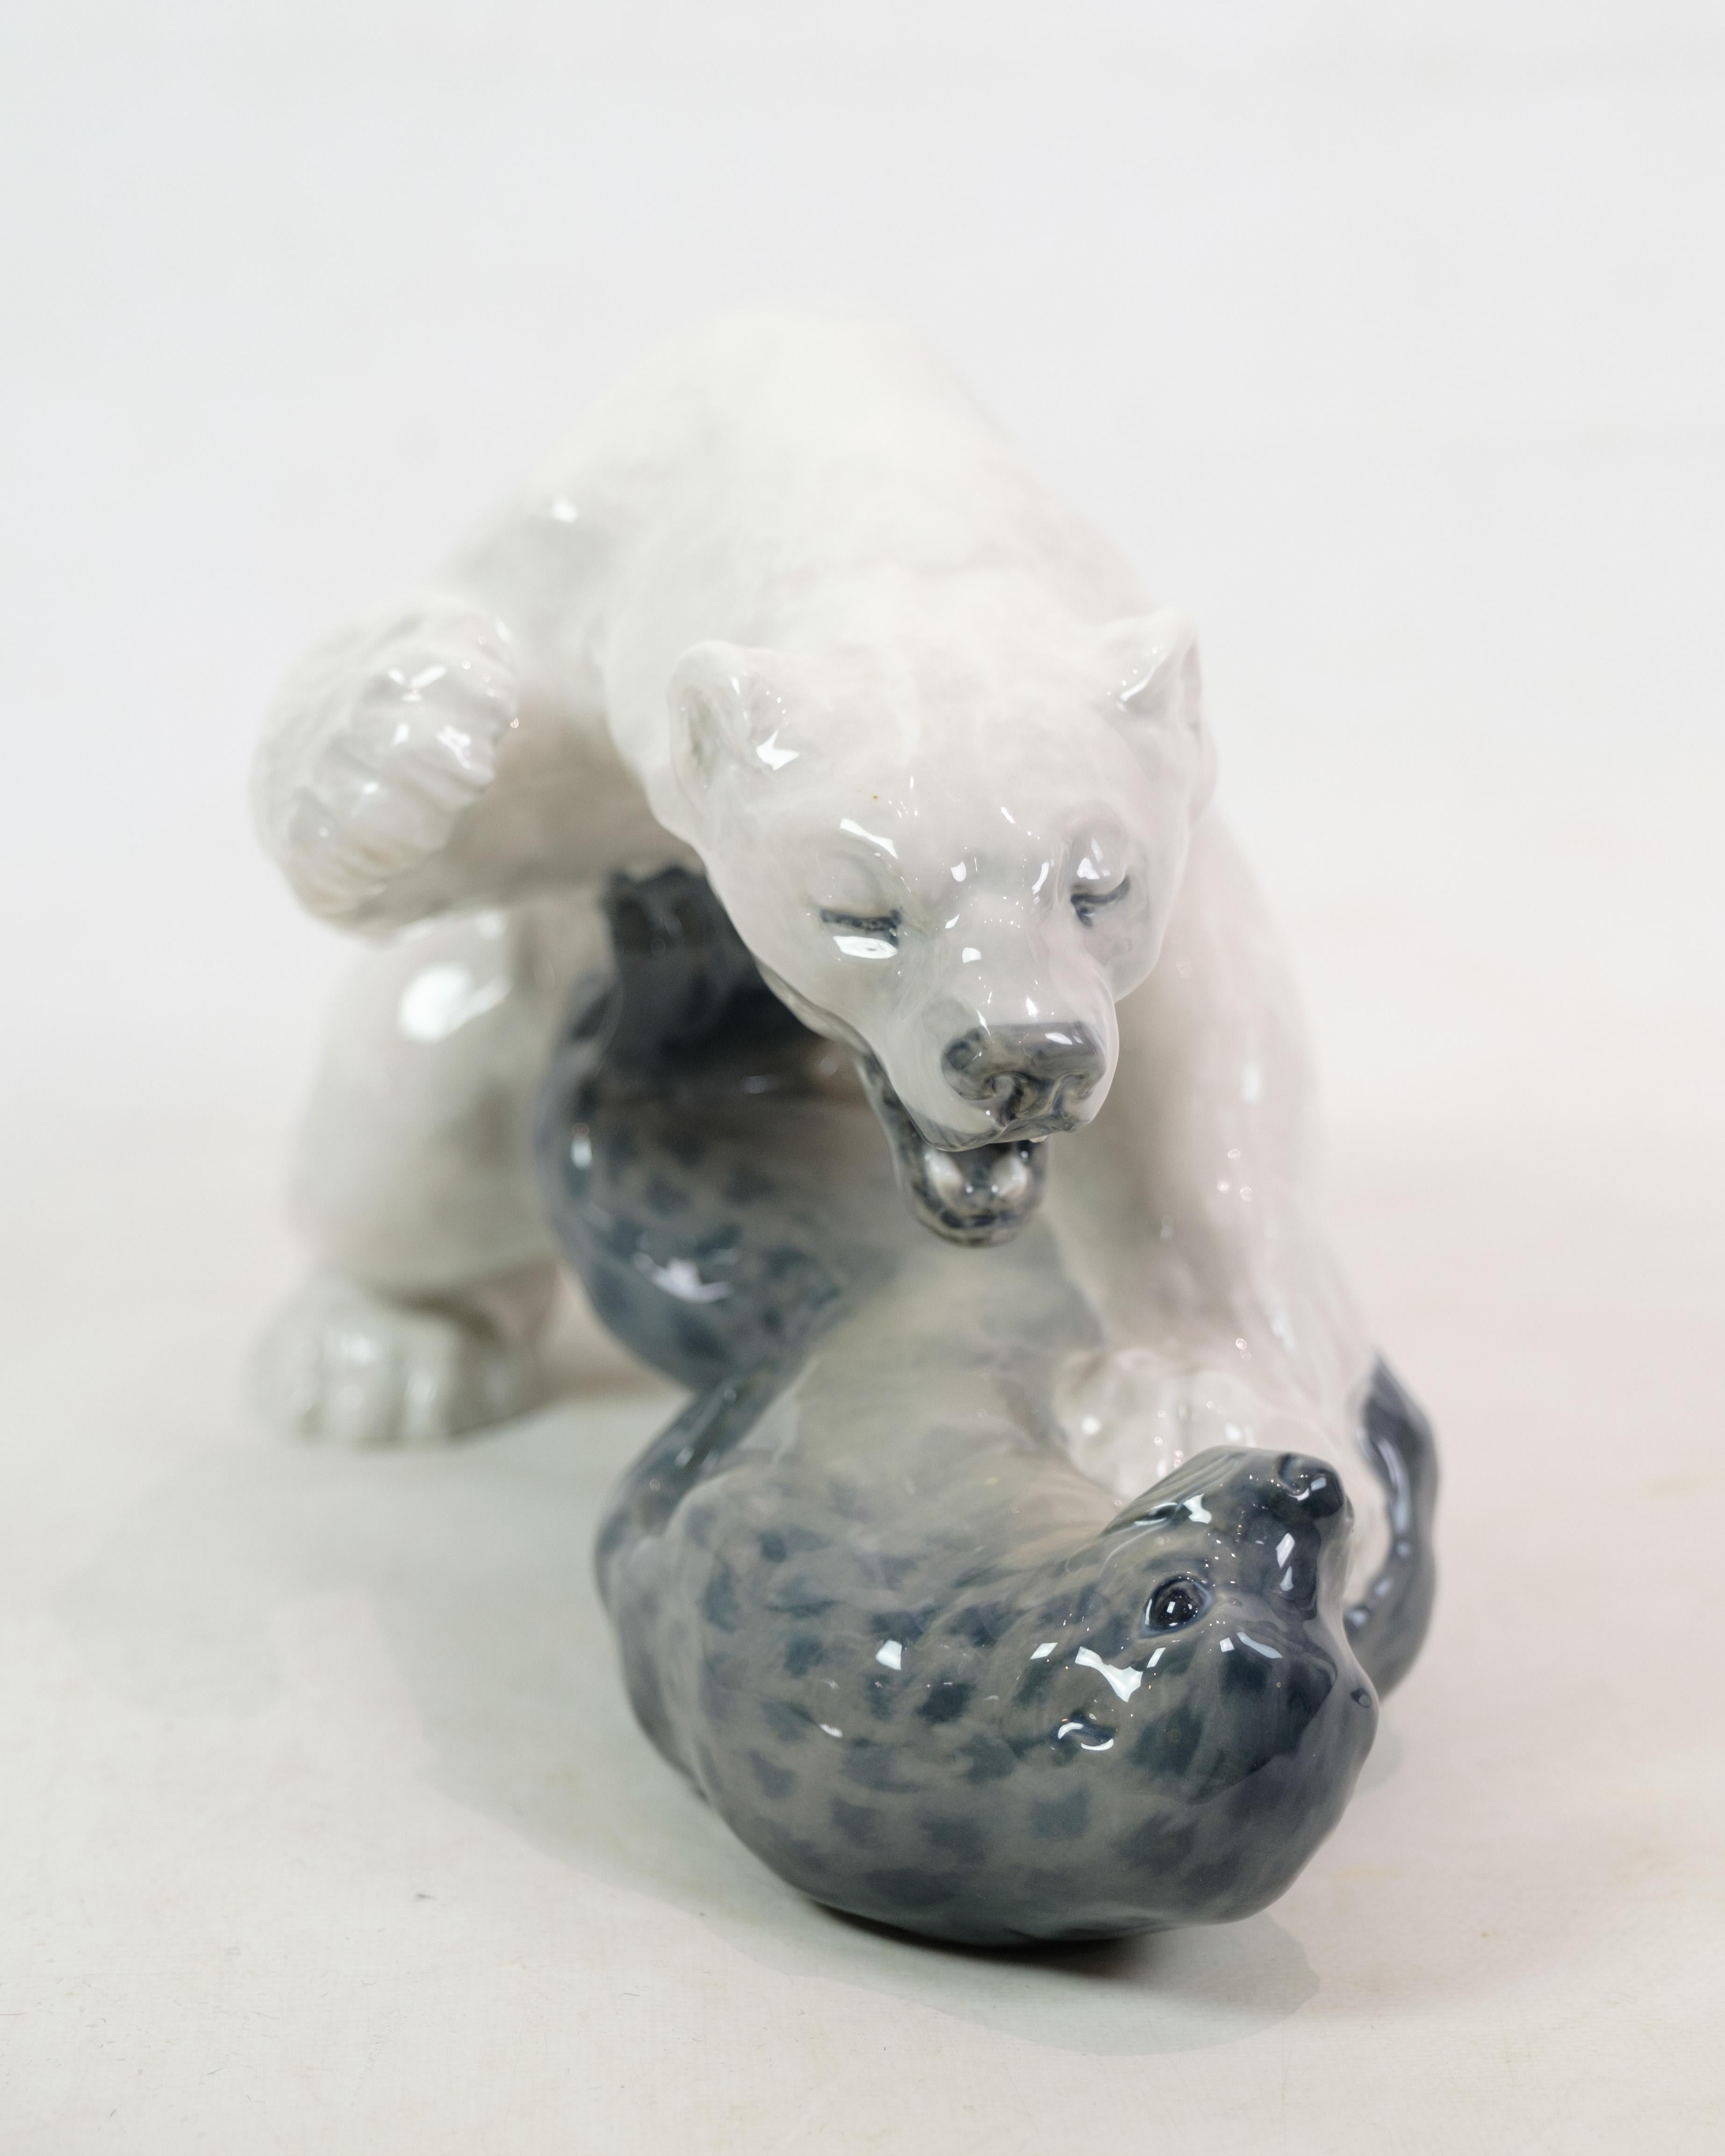 This beautiful porcelain figure of a polar bear and a seal is a fantastic example of Royal Copenhagen's Fine craftsmanship. Figure no. 1108 was designed by Knud Kyhn in 1909 and is a true Classic from Royal Copenhagen's collection.

Figure no.